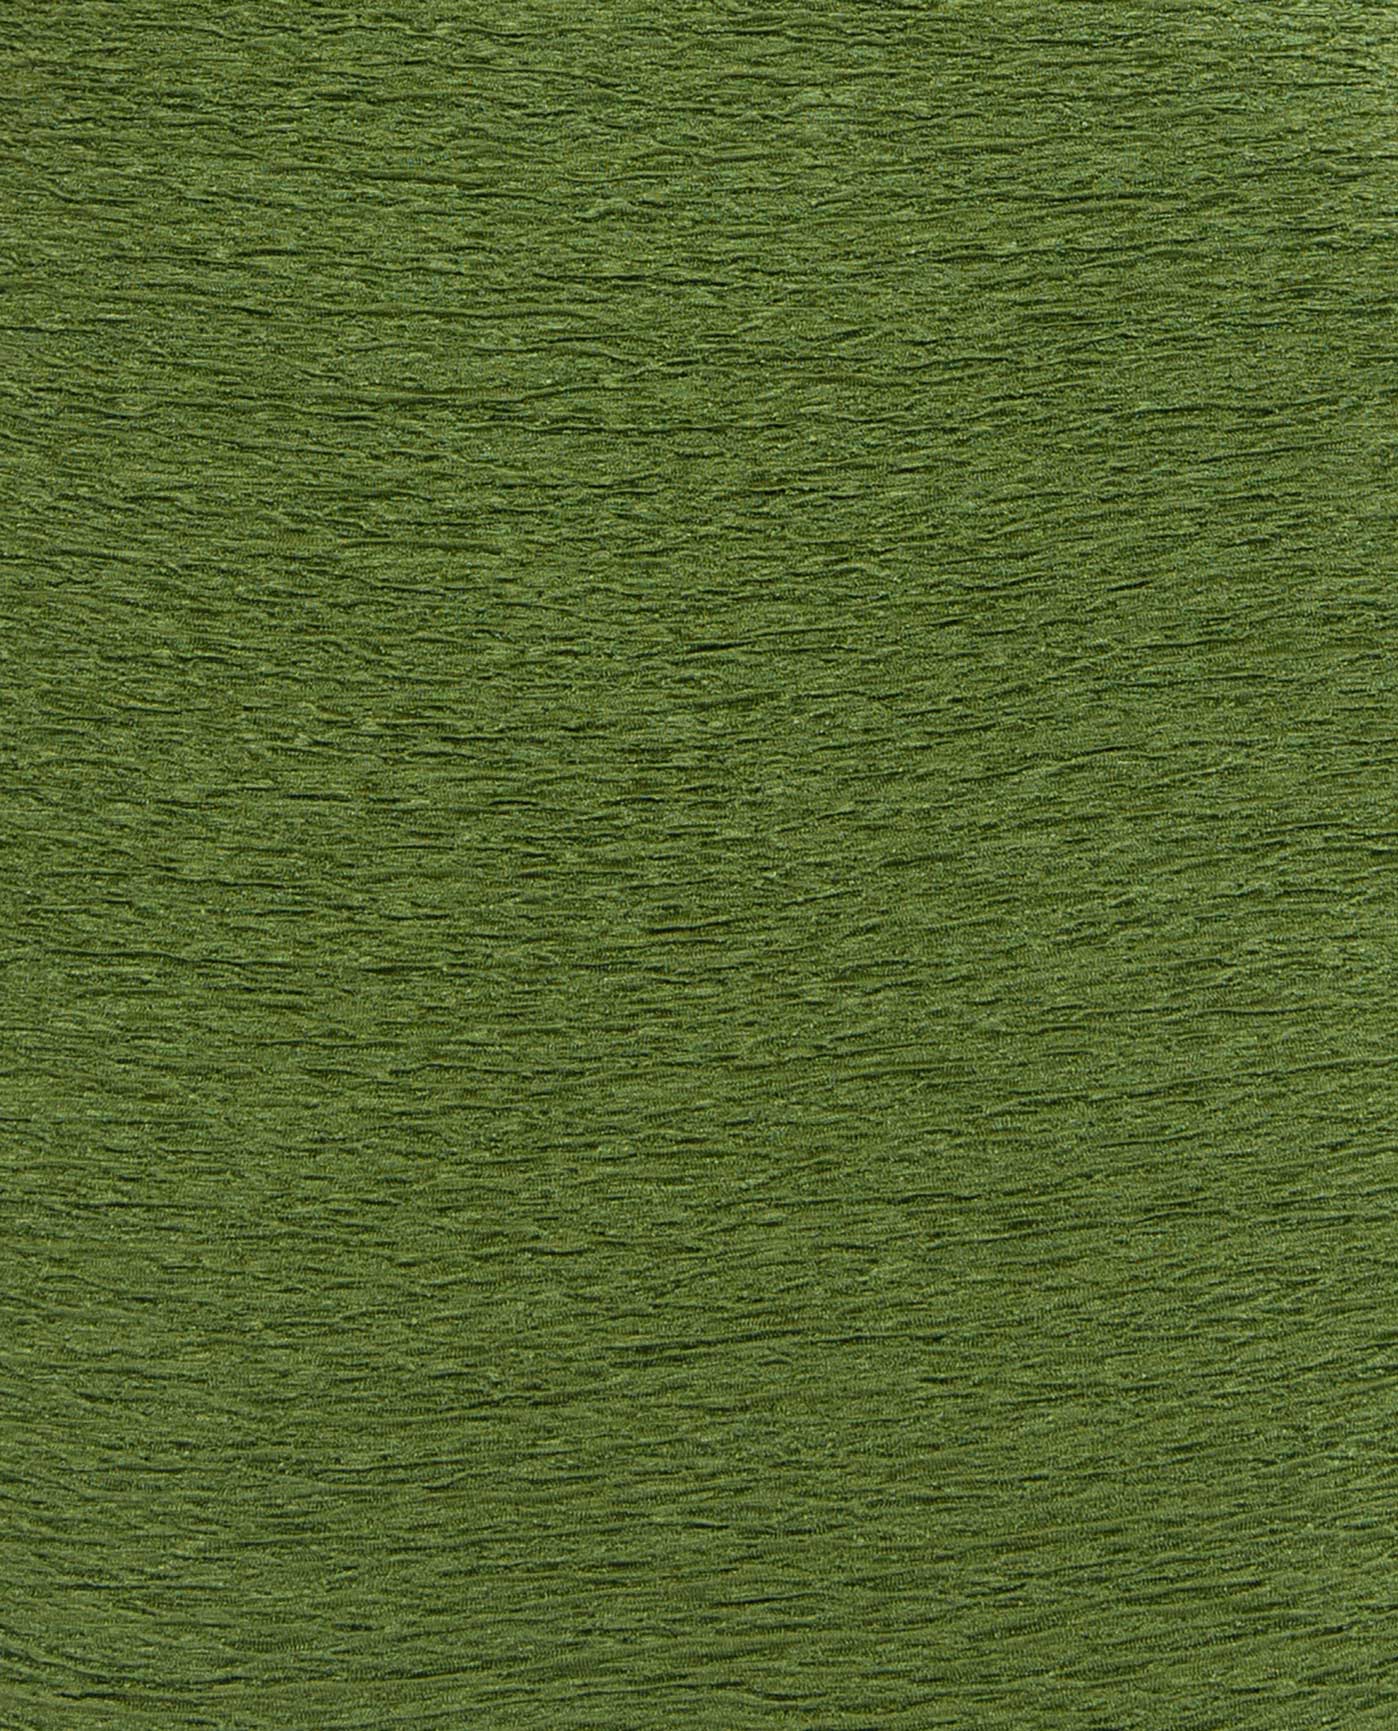 FABRIC SWATCH VIEW OF CHLORINE RESISTANT KRINKLE TEXTURED SOLID SHIRRED ONE PIECE | KRINKLE OLIVE